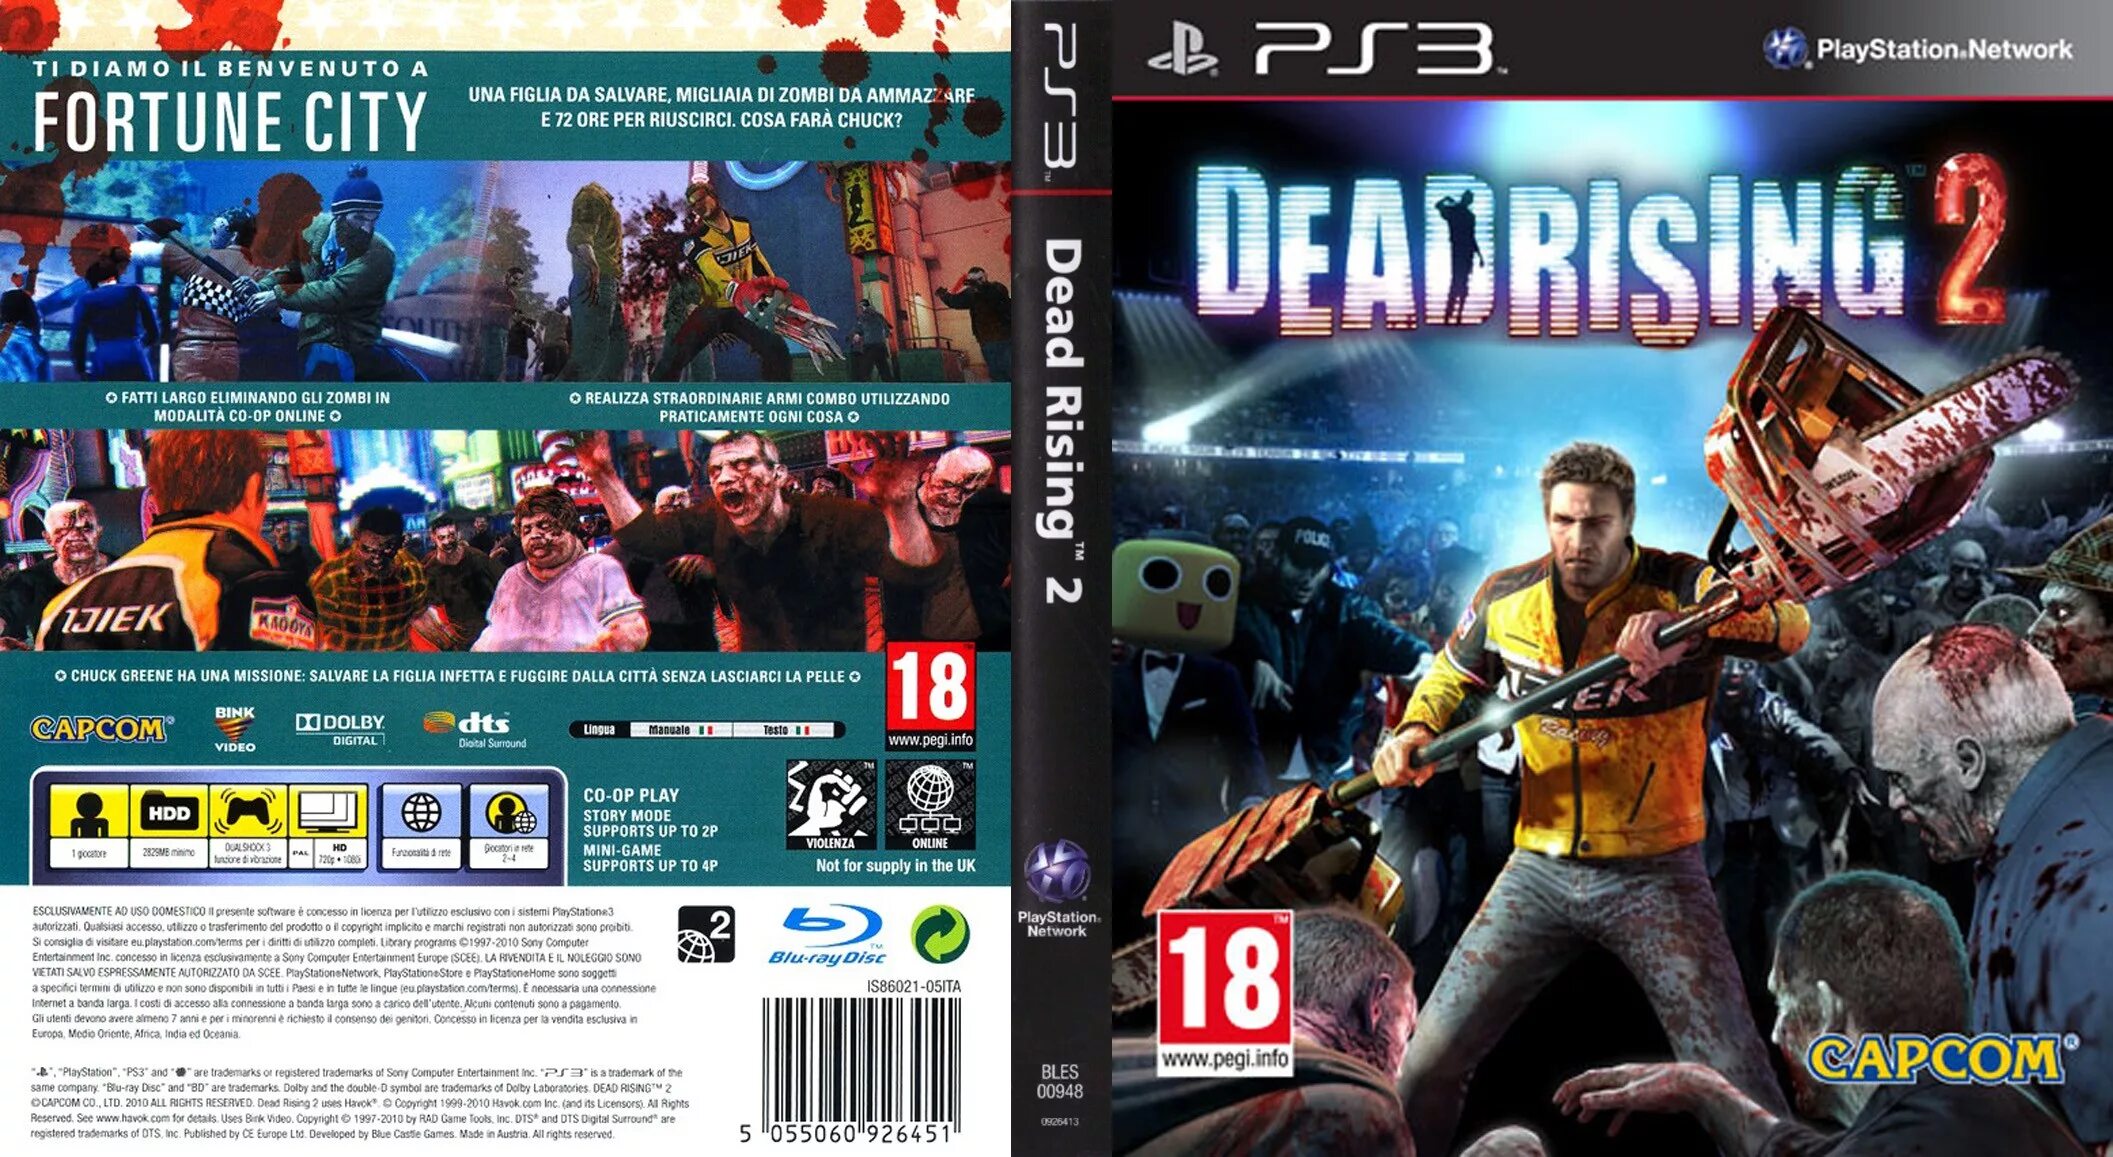 Ps3 зомби. Диск ps3 Dead Rising 2. Dead Rising 2 ps3 обложка. Dead Rising 2 [ps3]. Dead Rising 2 Xbox 360 диск.